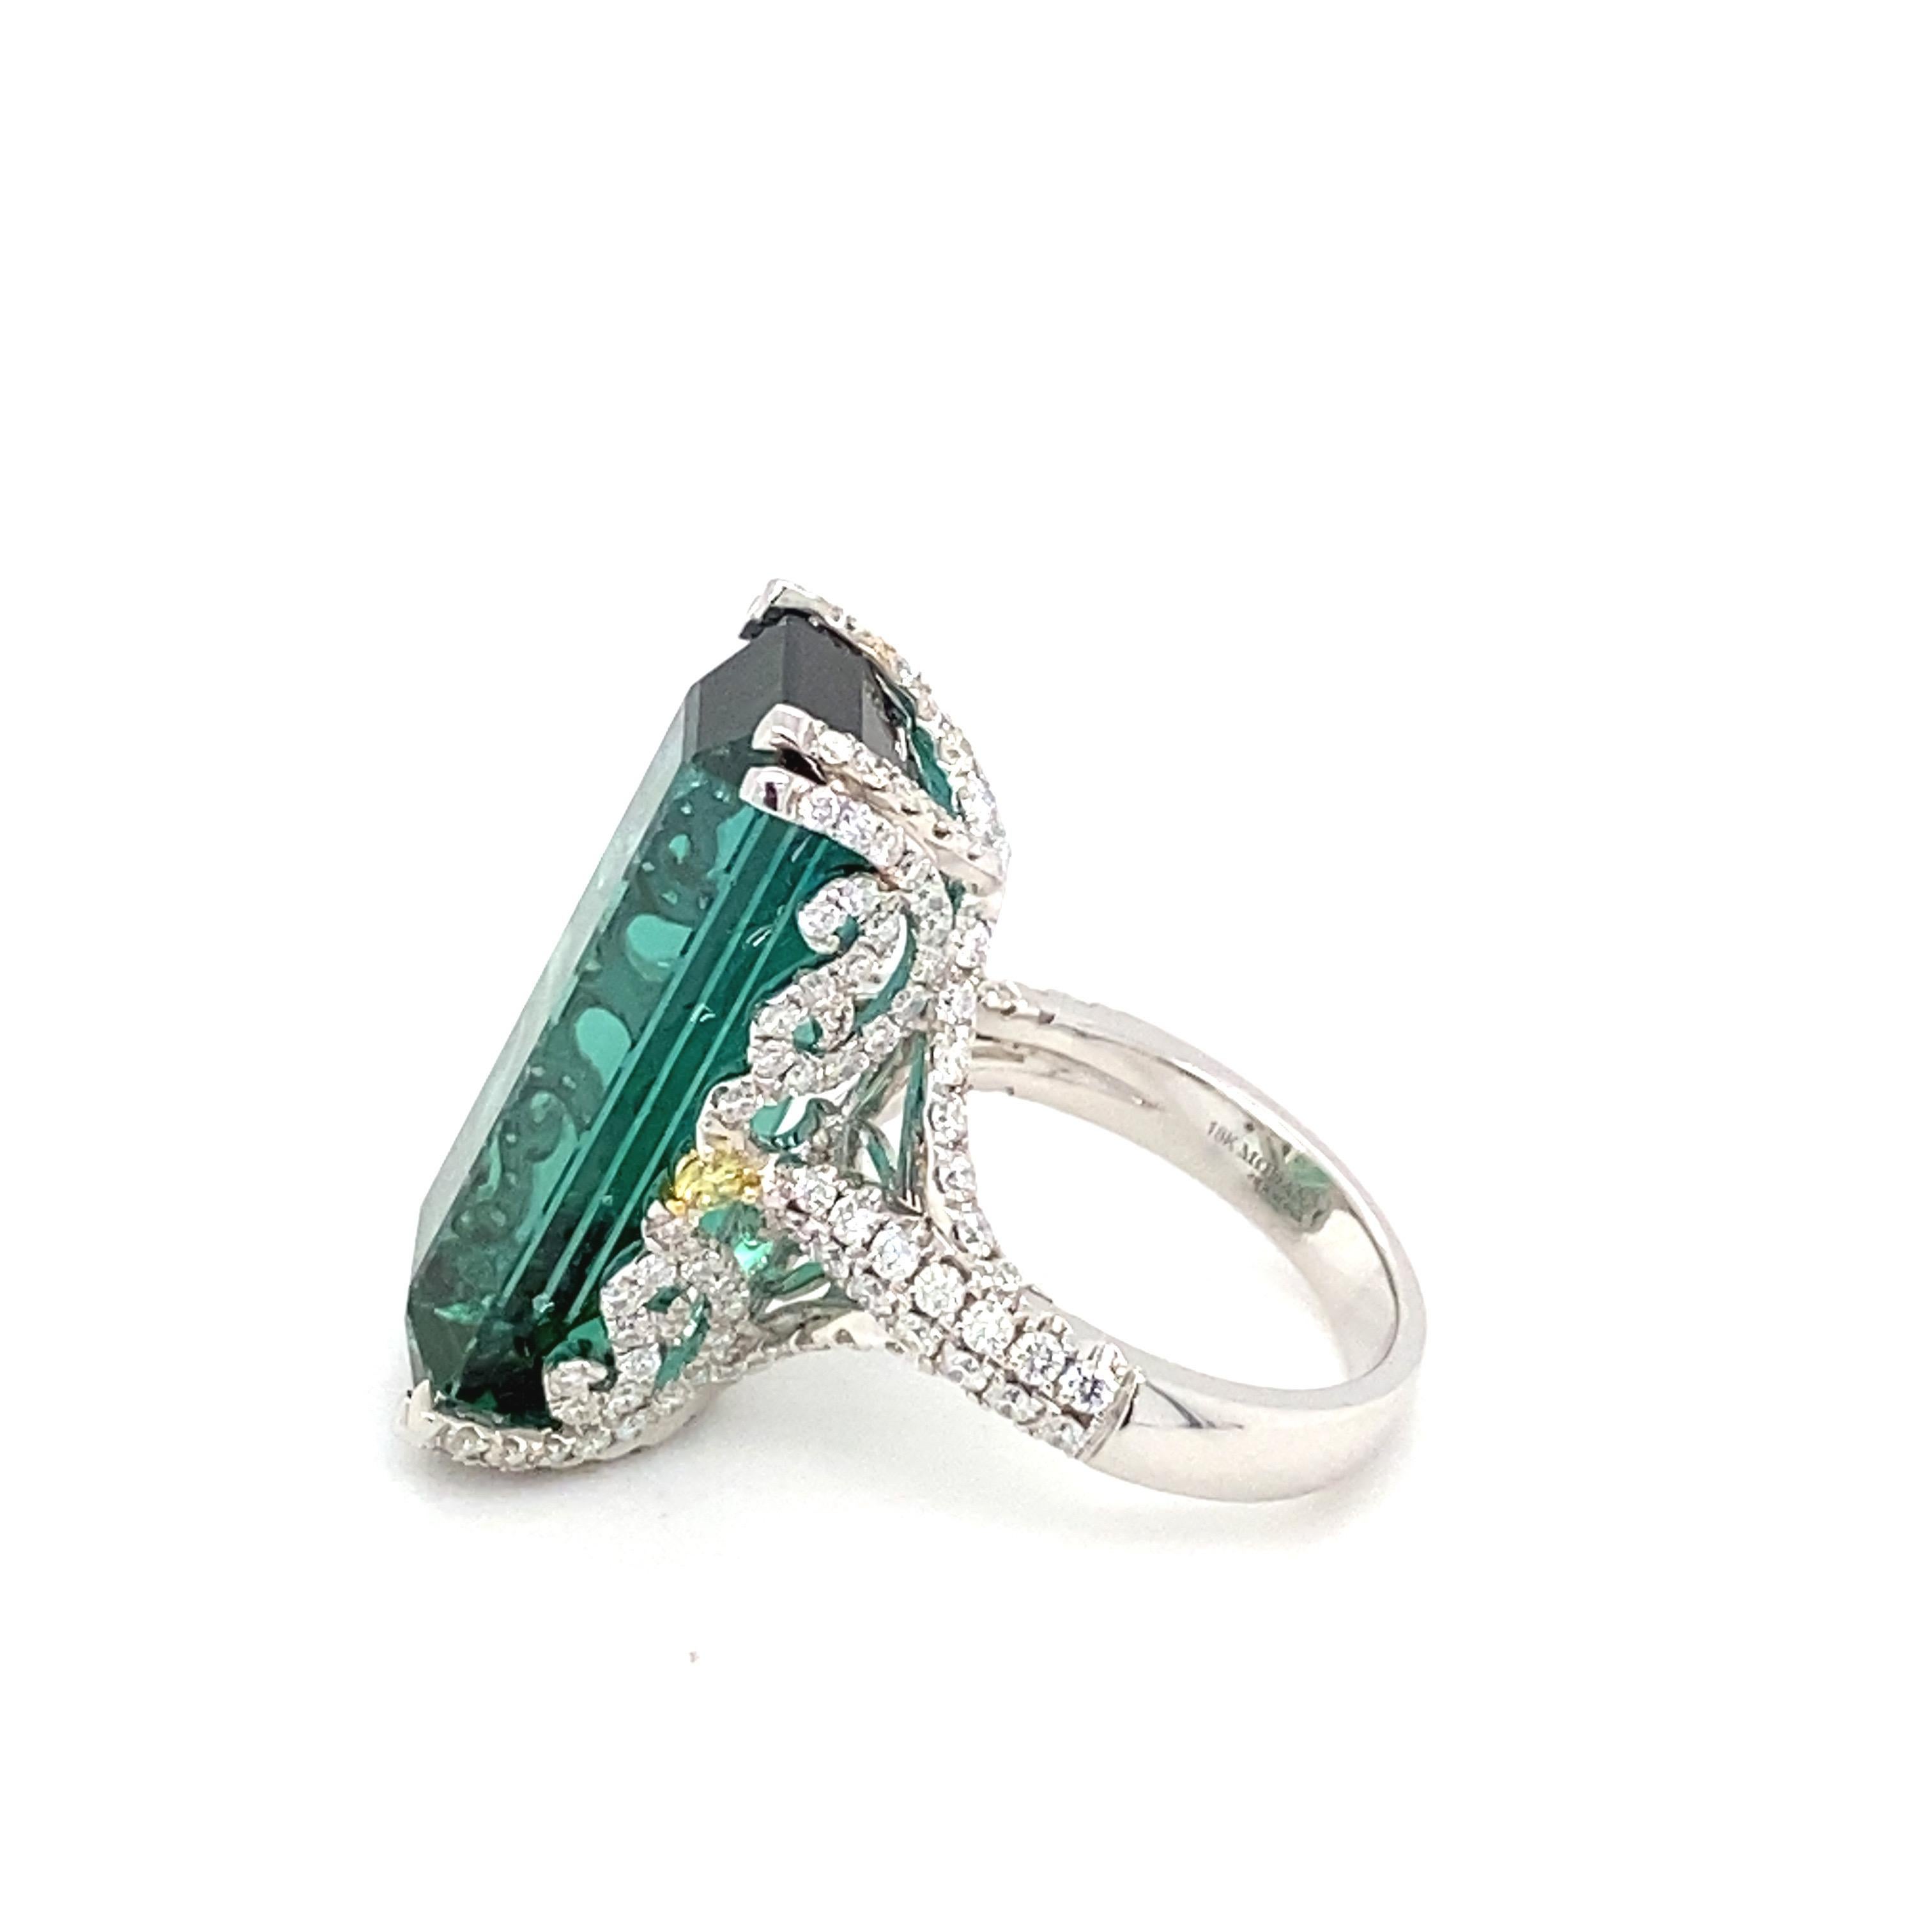 21.86 Carat Baguette Cut Indicolite Tourmaline Diamond White Gold Cocktail Ring In New Condition For Sale In Trumbull, CT